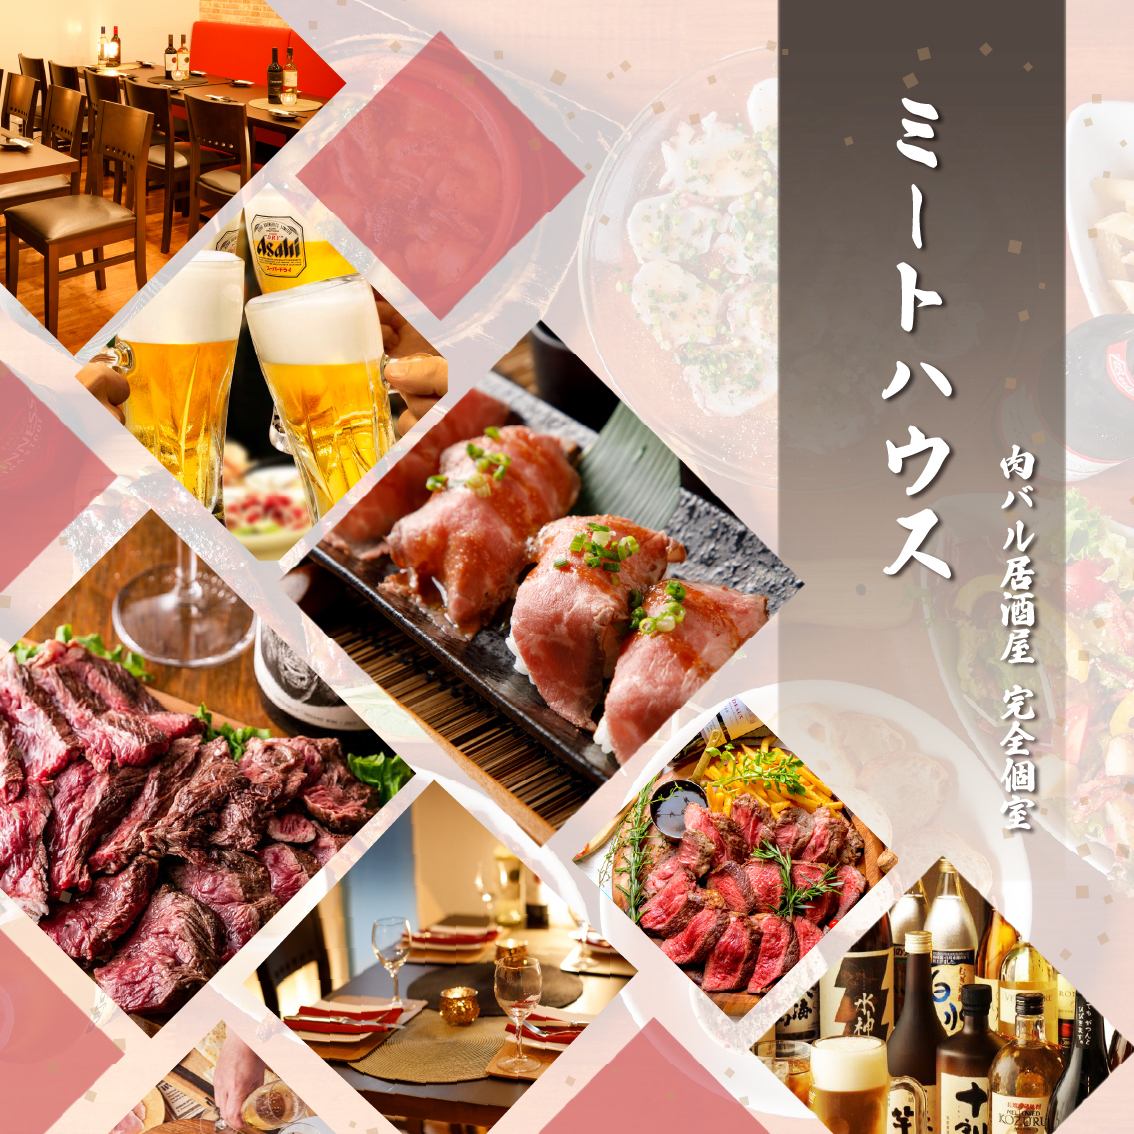 Fully equipped with private seating ◎ Relaxing all-you-can-drink plans available from 3,300 yen where you can enjoy lost beef!